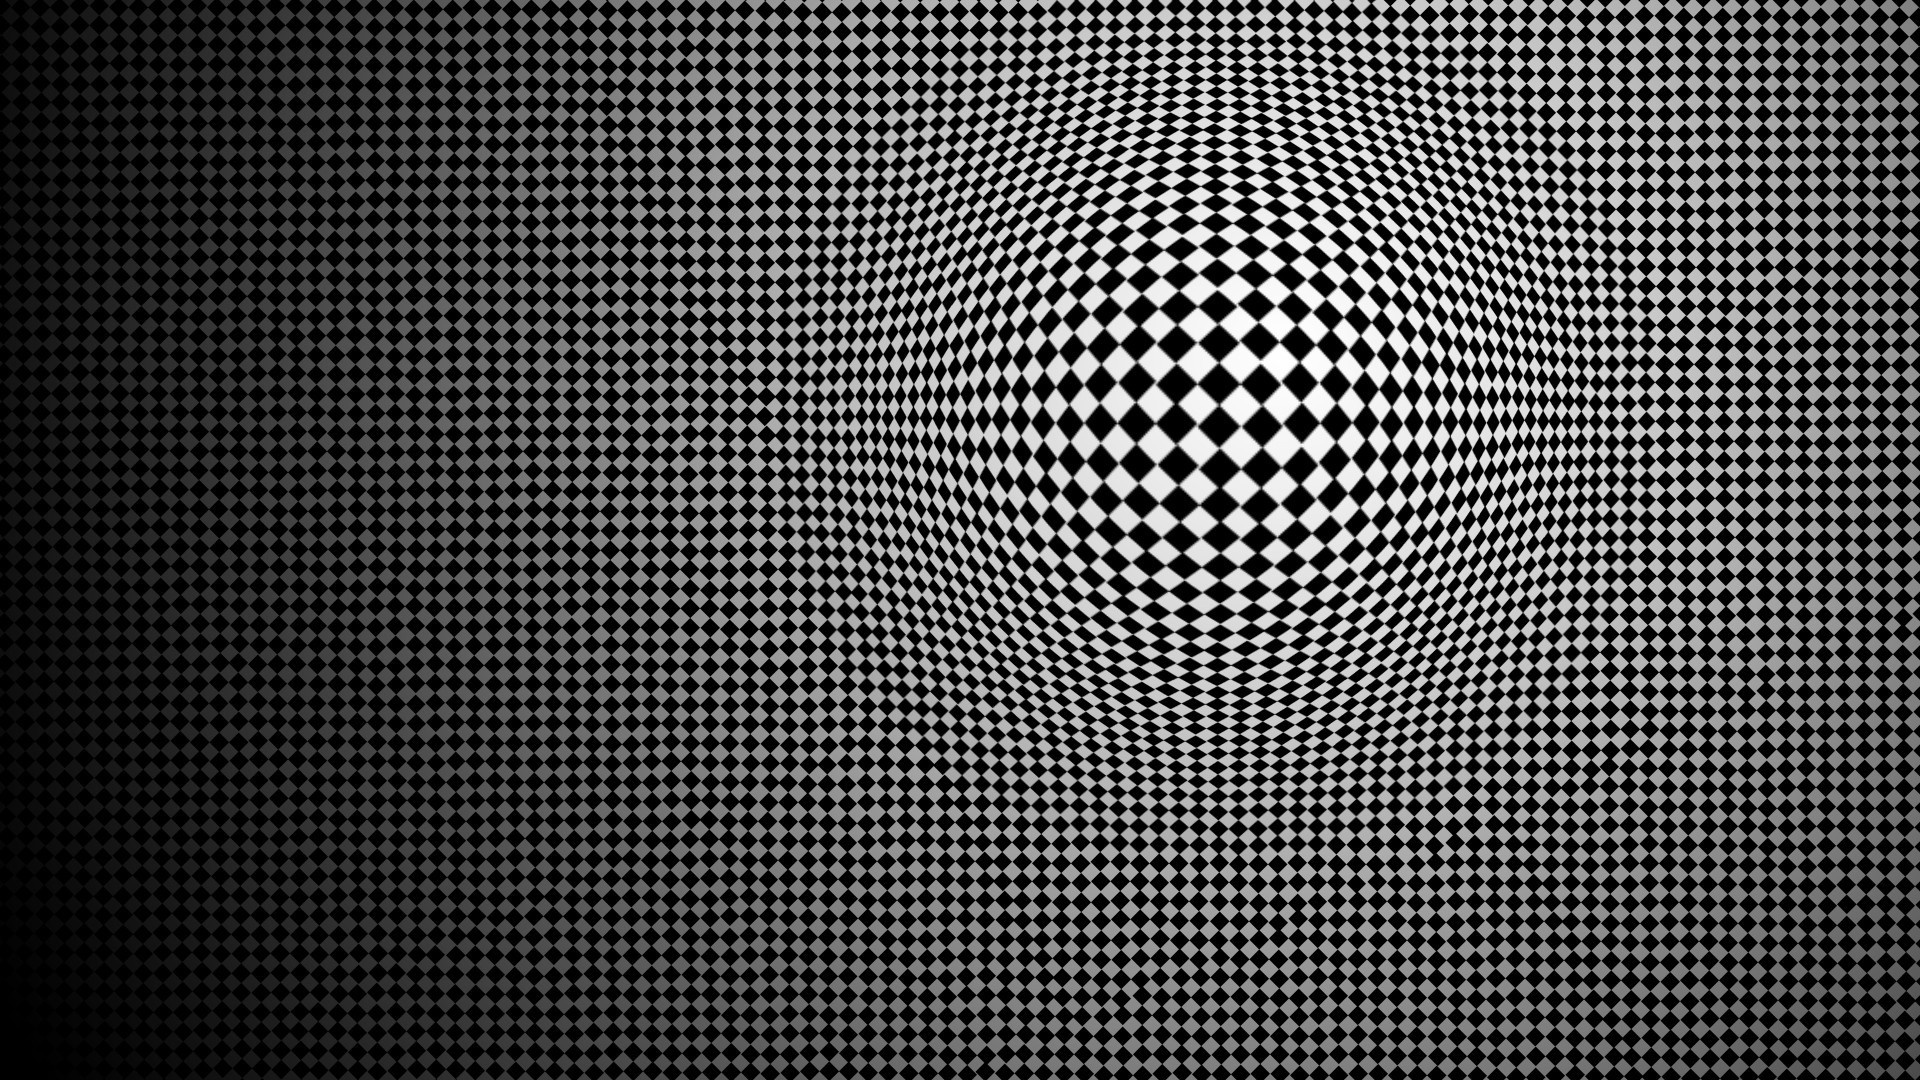 Optical illusion, Abstract symmetry, Pattern texture, Monochrome photography, 1920x1080 Full HD Desktop